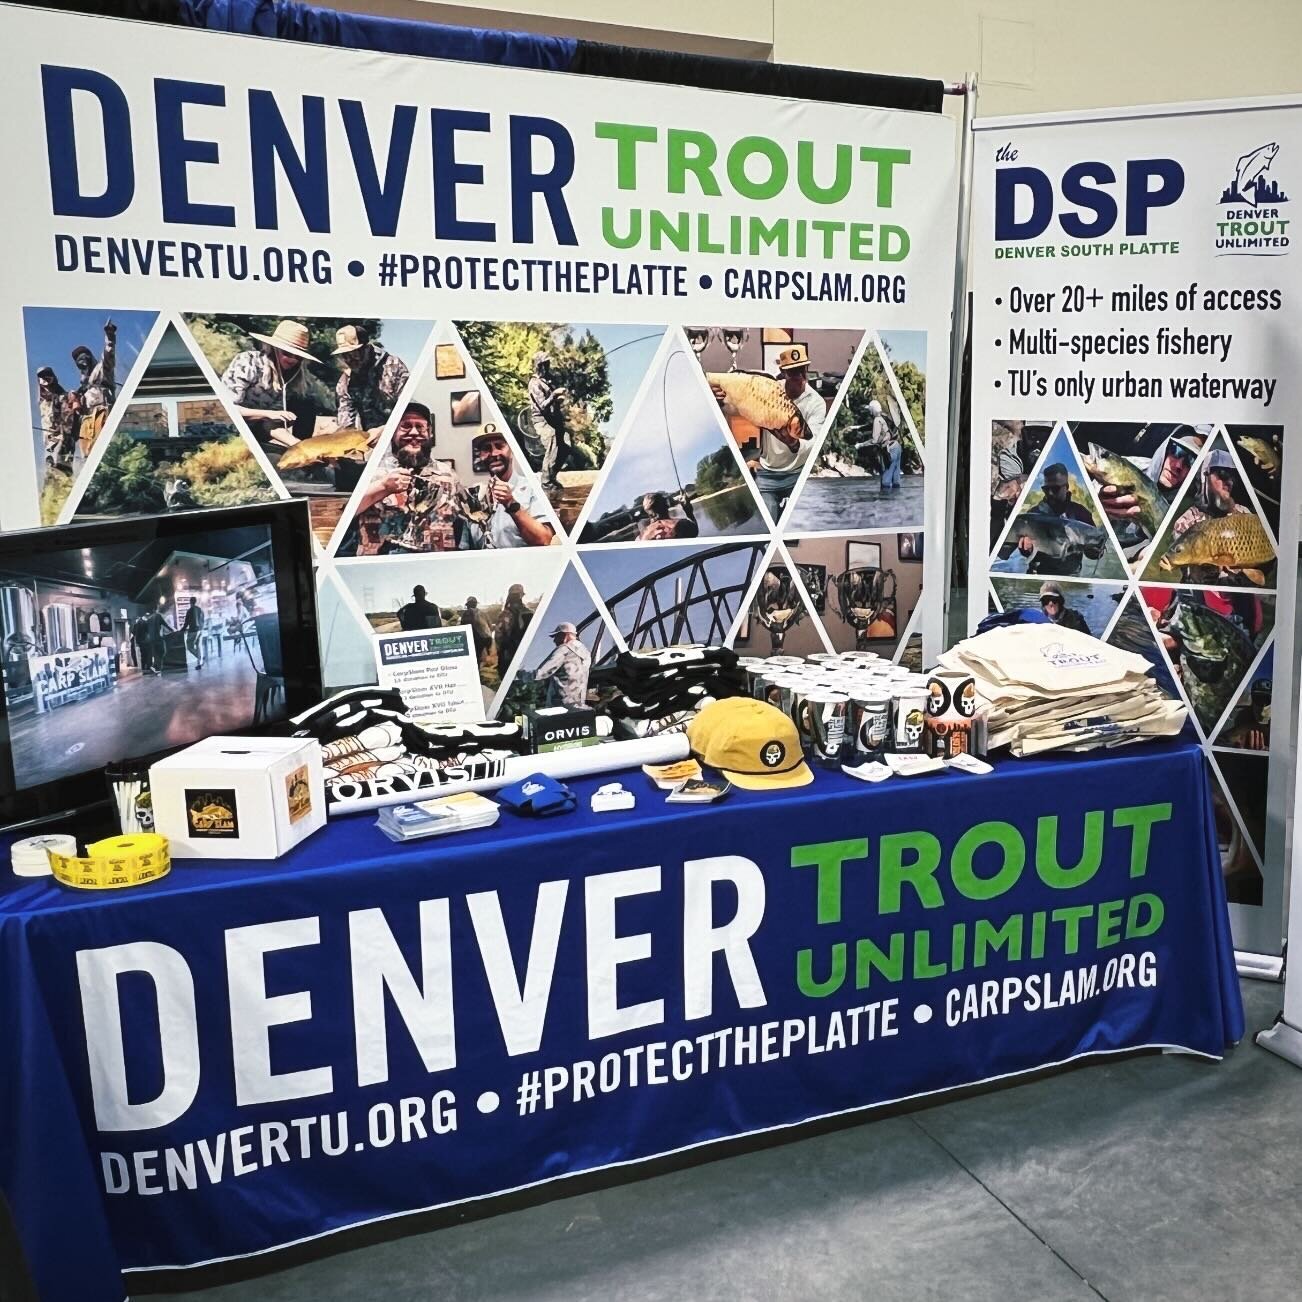 Stop by the DTU Booth at @theflyfishingshow this weekend to chat all things DSP!!! 
&bull; Win CarpSlam Pint Glasses
&bull; Win DTU Reusable Bags
&bull; Raffle for Orvis Rod &amp; Reel
&bull; CarpSlam swag for sale
&bull; Free Stickers